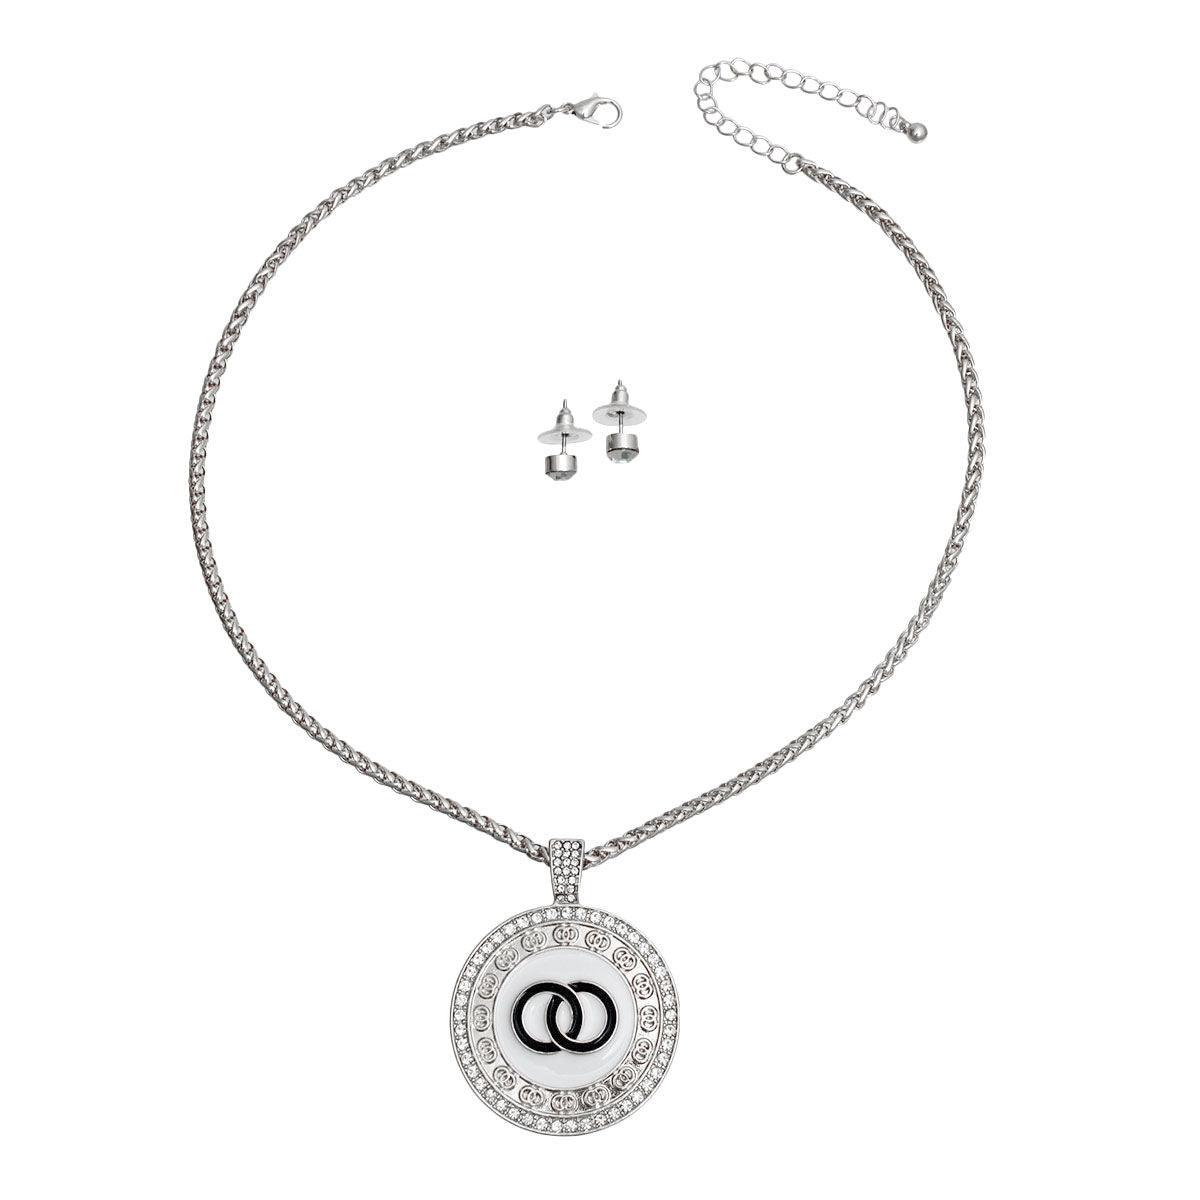 Women's Silver Elegant Infinity Necklaces Pendant Set: Express Timeless Connection